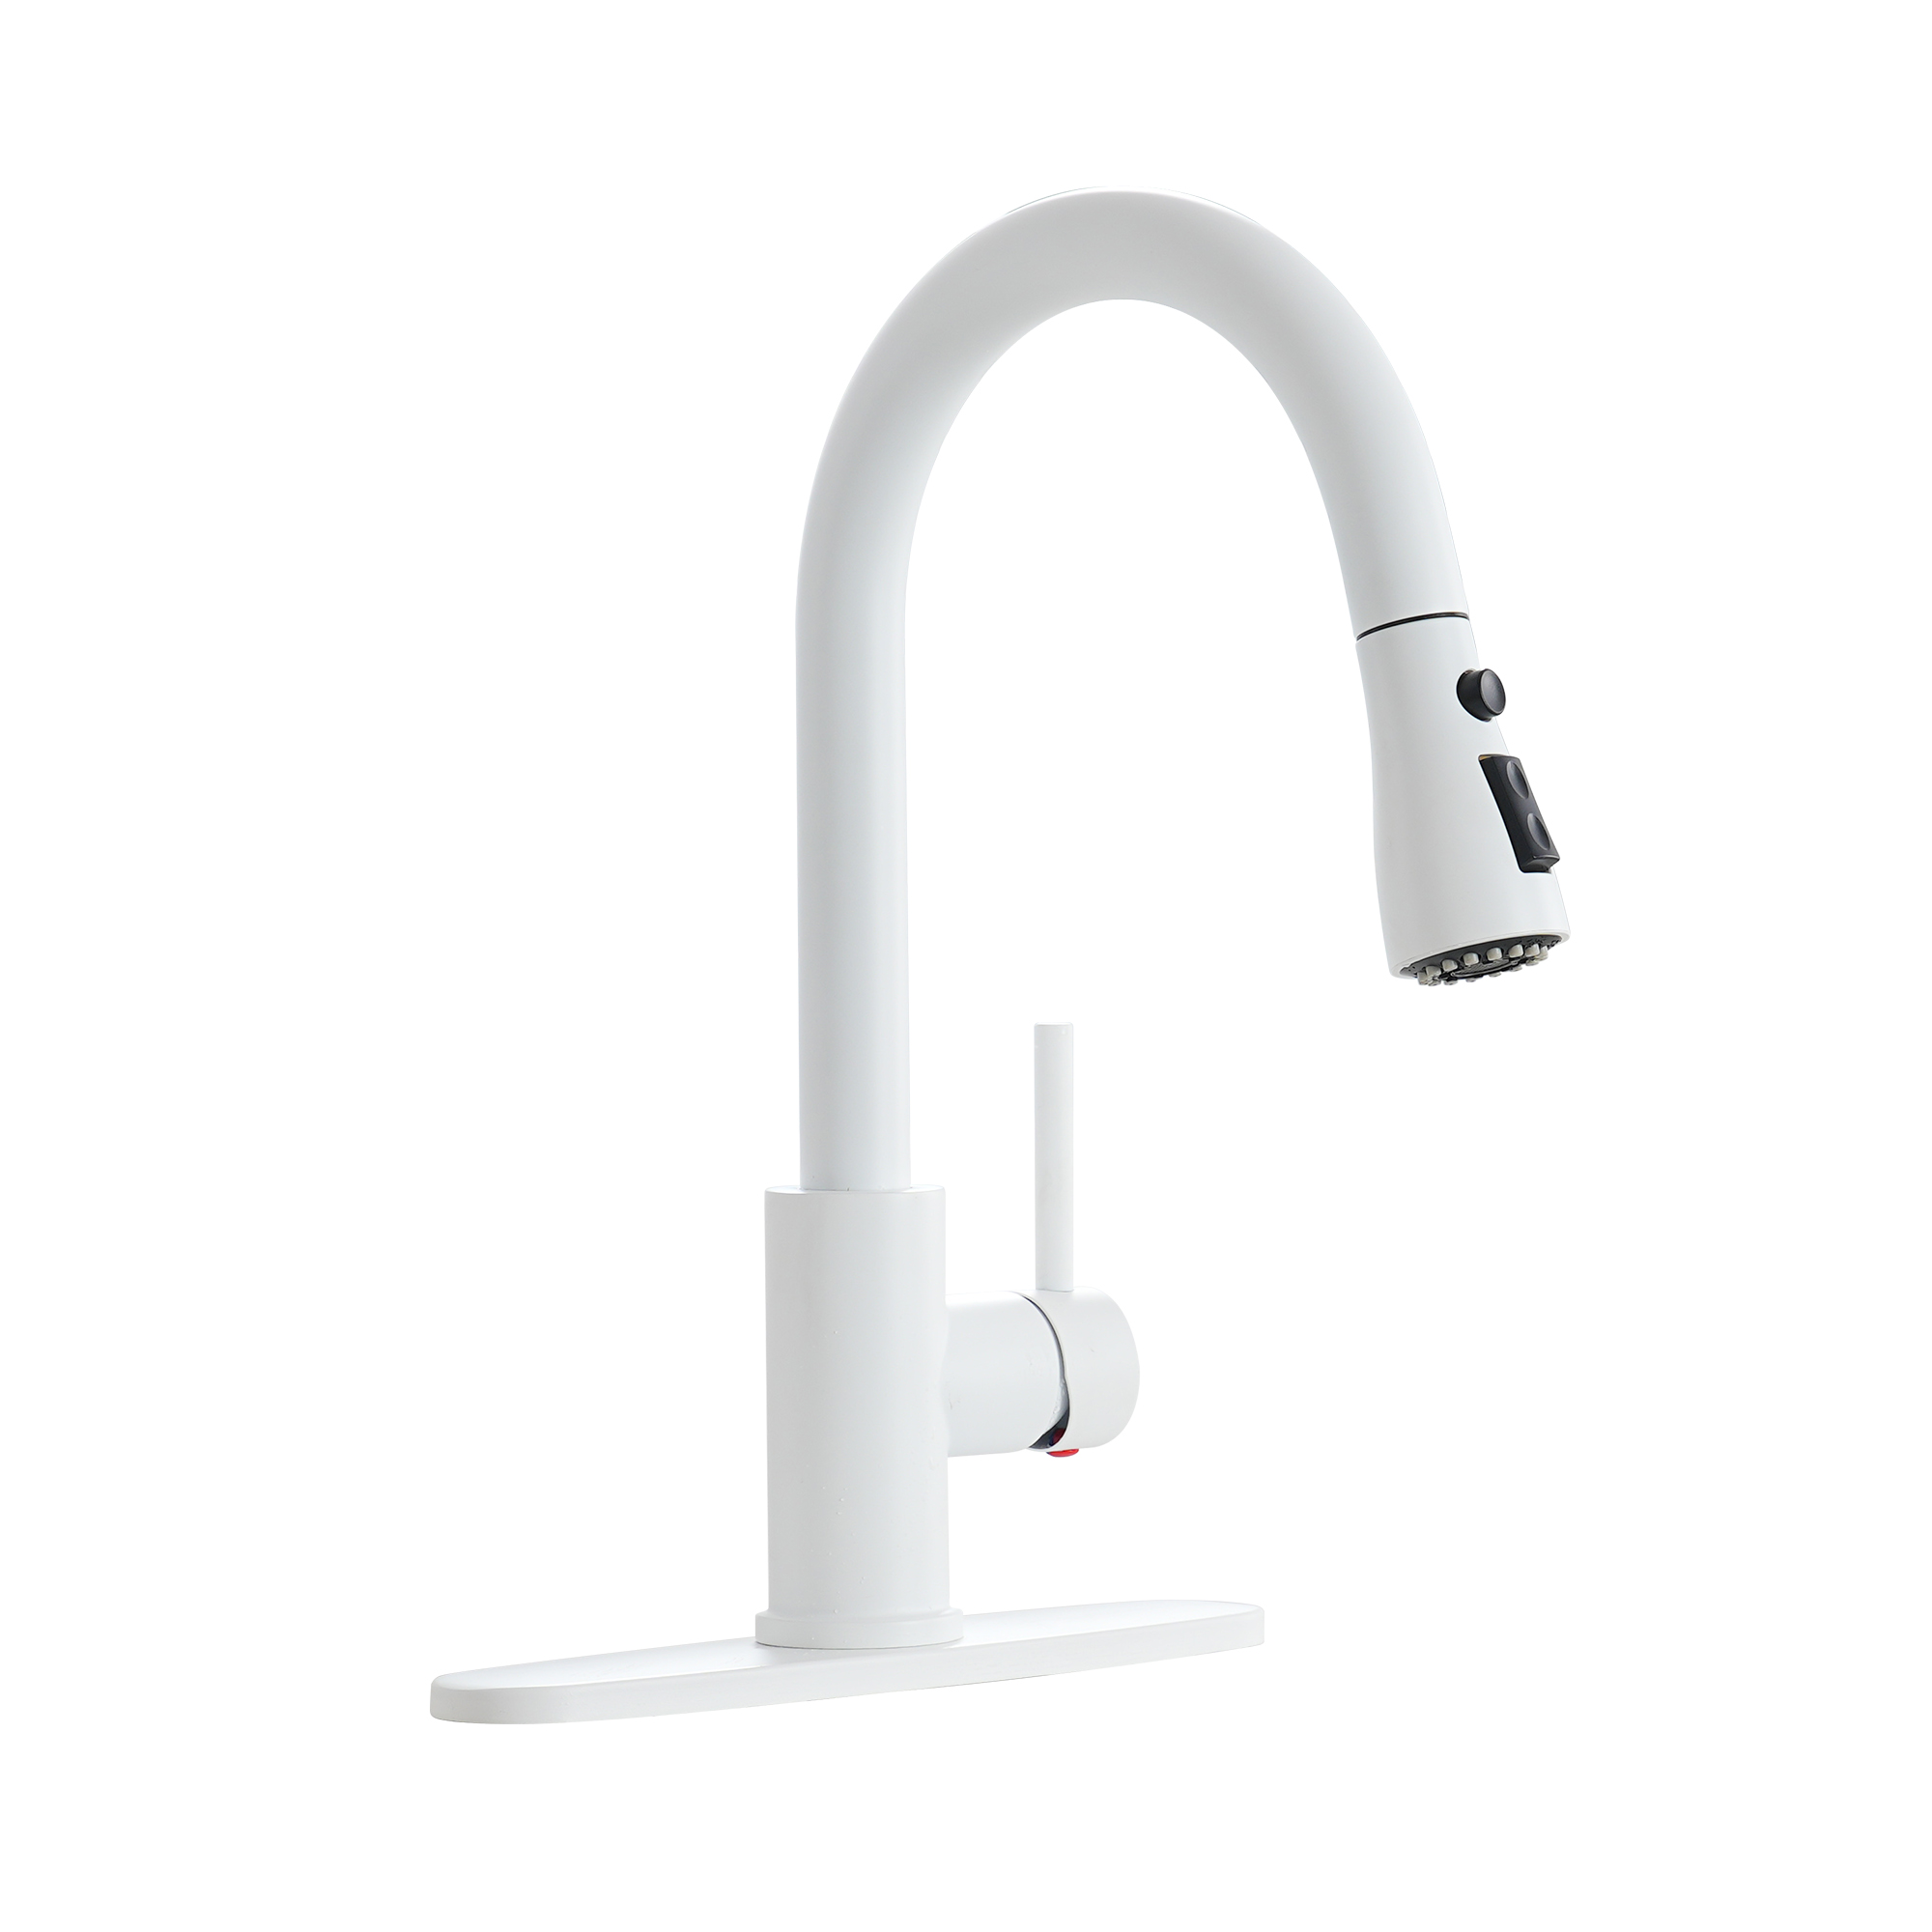 Mondawe White Single Handle Gooseneck Pull-down Kitchen Faucet with Sprayer Function